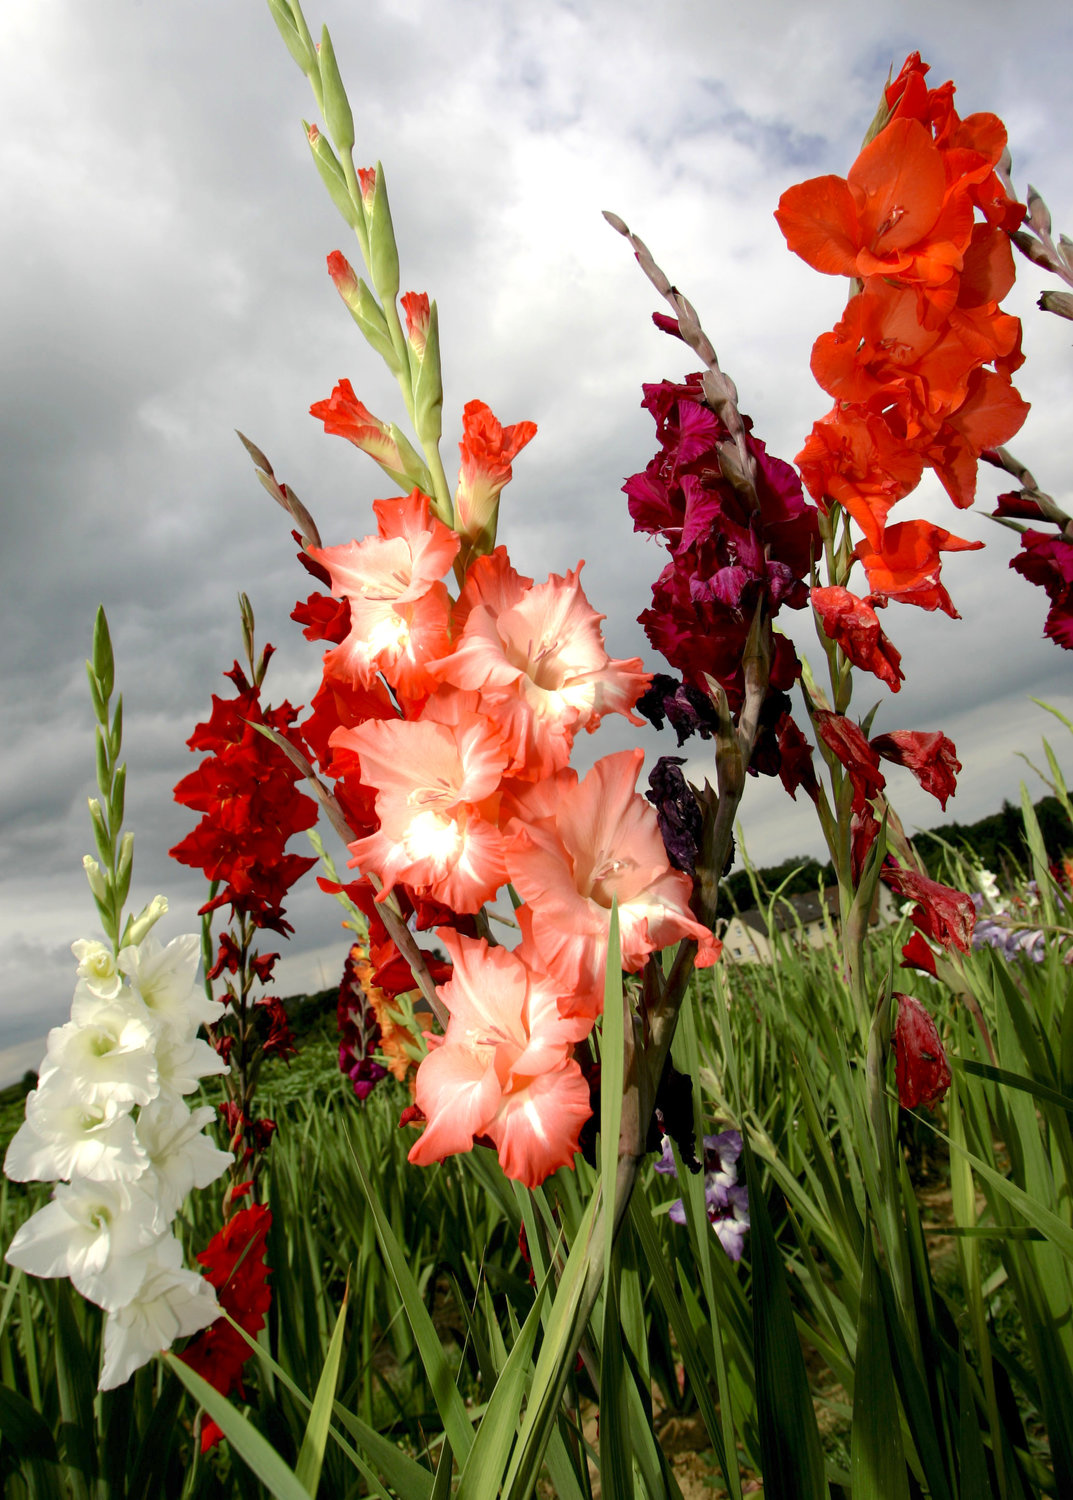 EASY TO GROW — Gladiolus flowers bloom near Sulzburg, southern Germany on Tuesday, July 22, 2008. Gladiolus are easy to grow provided you have a full sun location and good drainage.